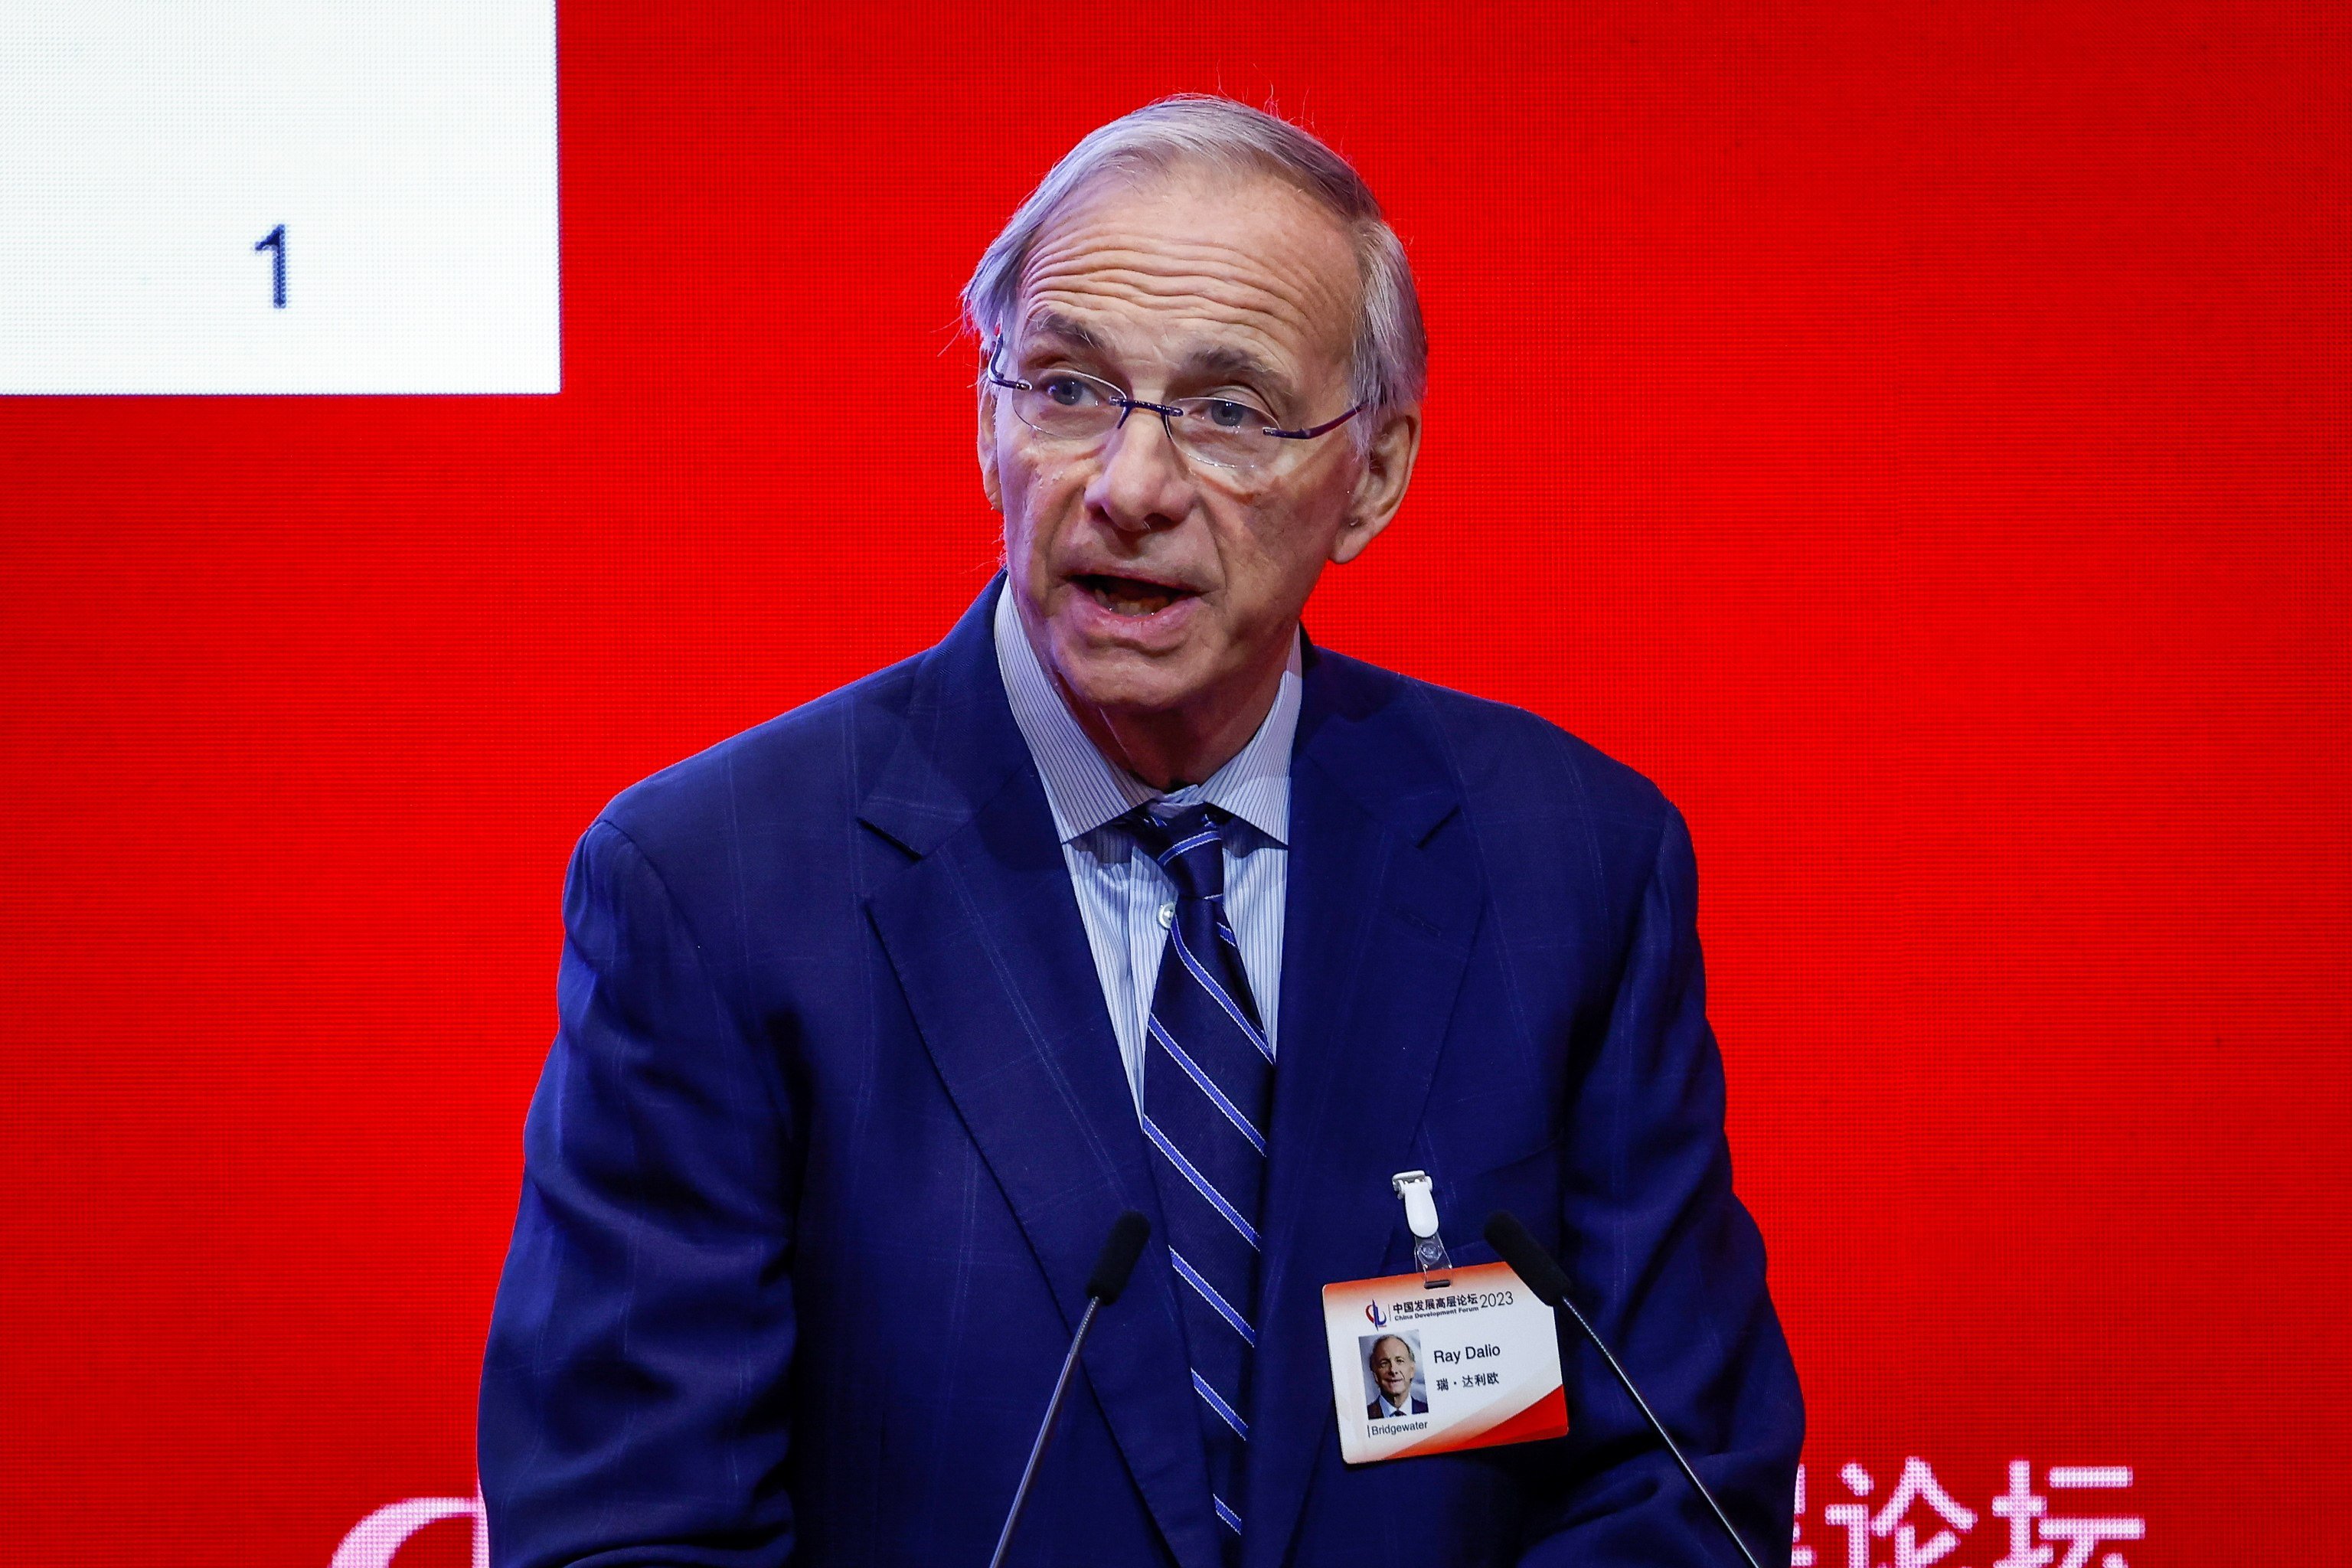 ‘China’s problems … are manageable by Chinese leaders if they do their jobs well by being both smart and courageous,’ says Ray Dalio, pictured here at the China Development Forum in Beijing, in March 2023. Photo: EPA-EFE
